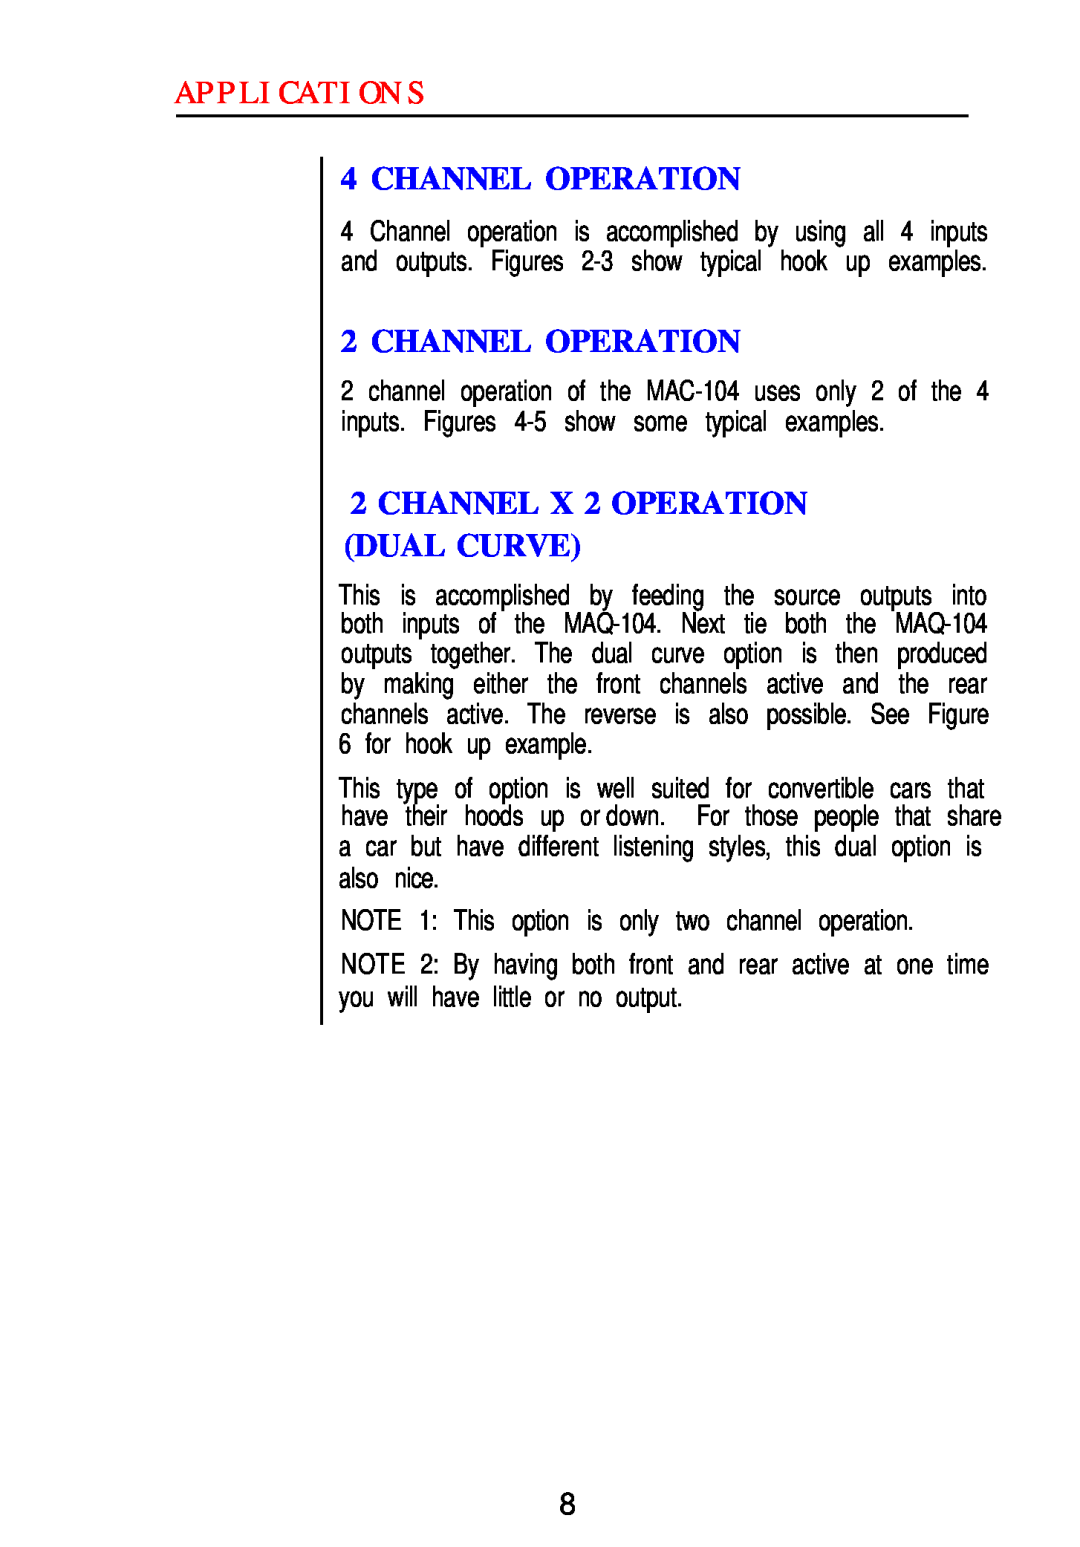 Hafler MAQ-104 owner manual Channel Operation, CHANNEL X 2 OPERATION DUAL CURVE, Applications 